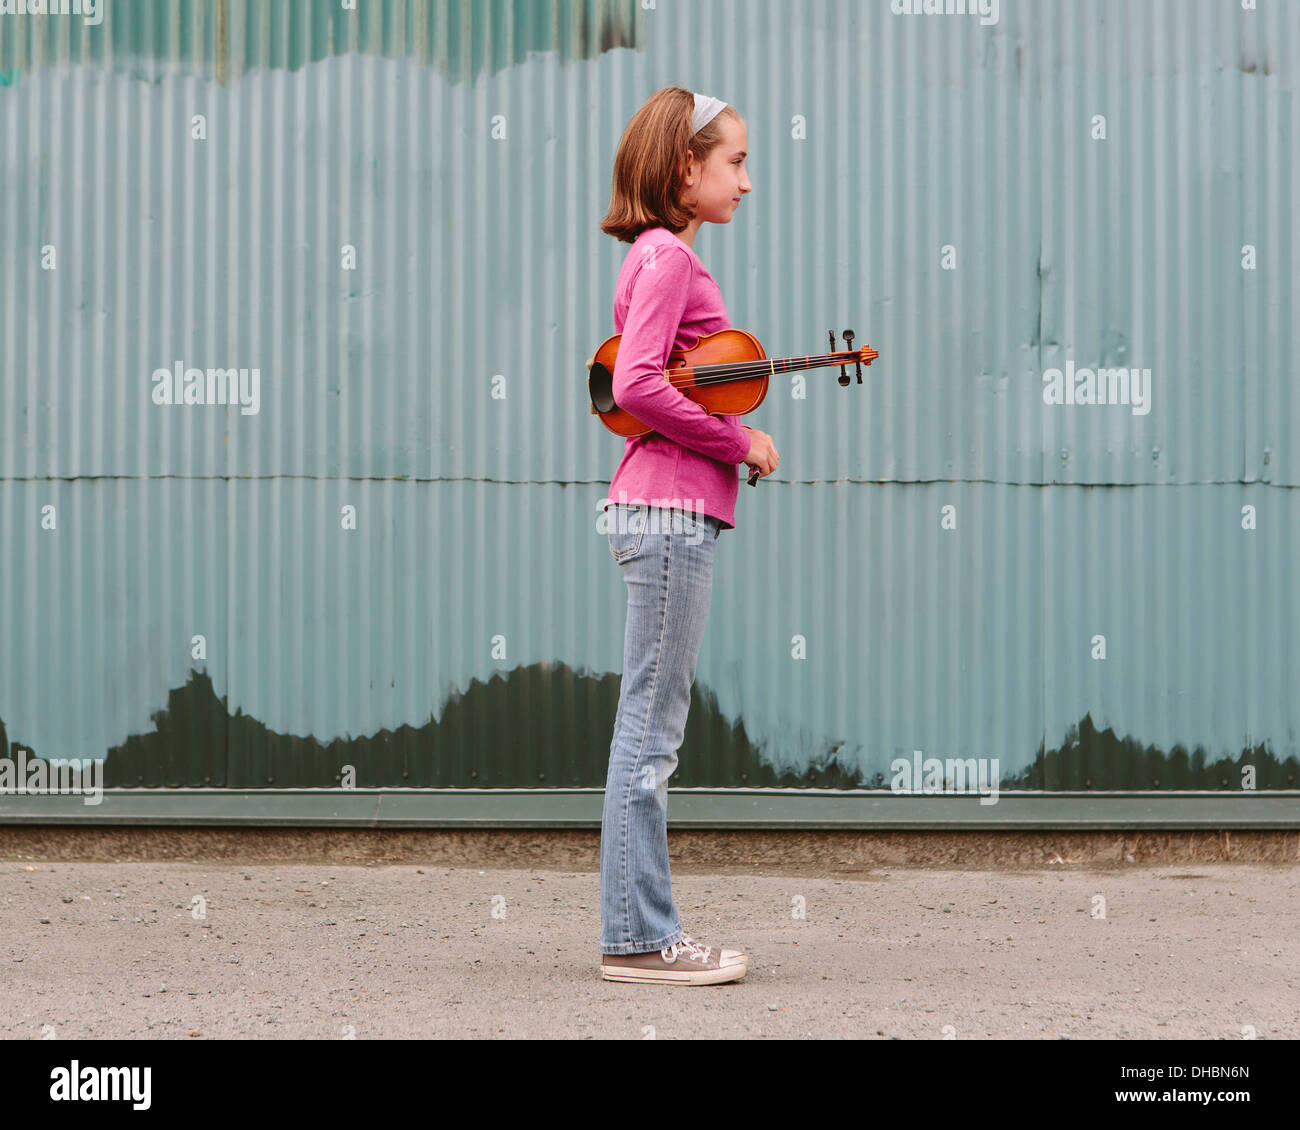 A ten year old girl holding a violin under her arm, standing on a street. Stock Photo